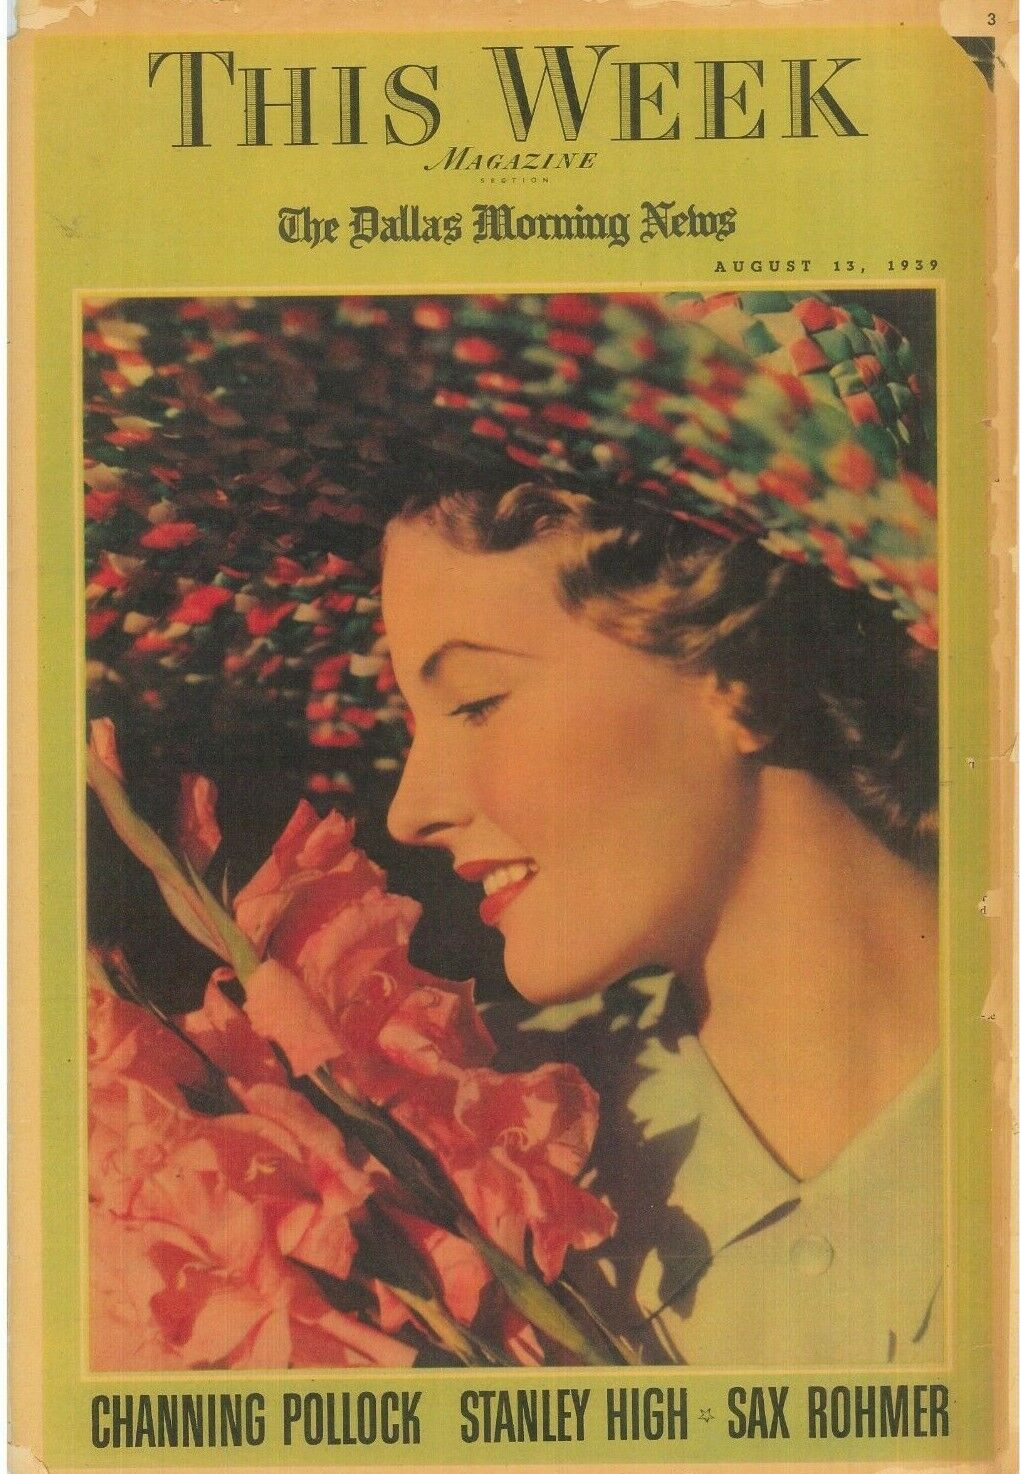 This Week Magazine August 13 1939 Sax Rohmer Channing Pollock Paul Hesse cover